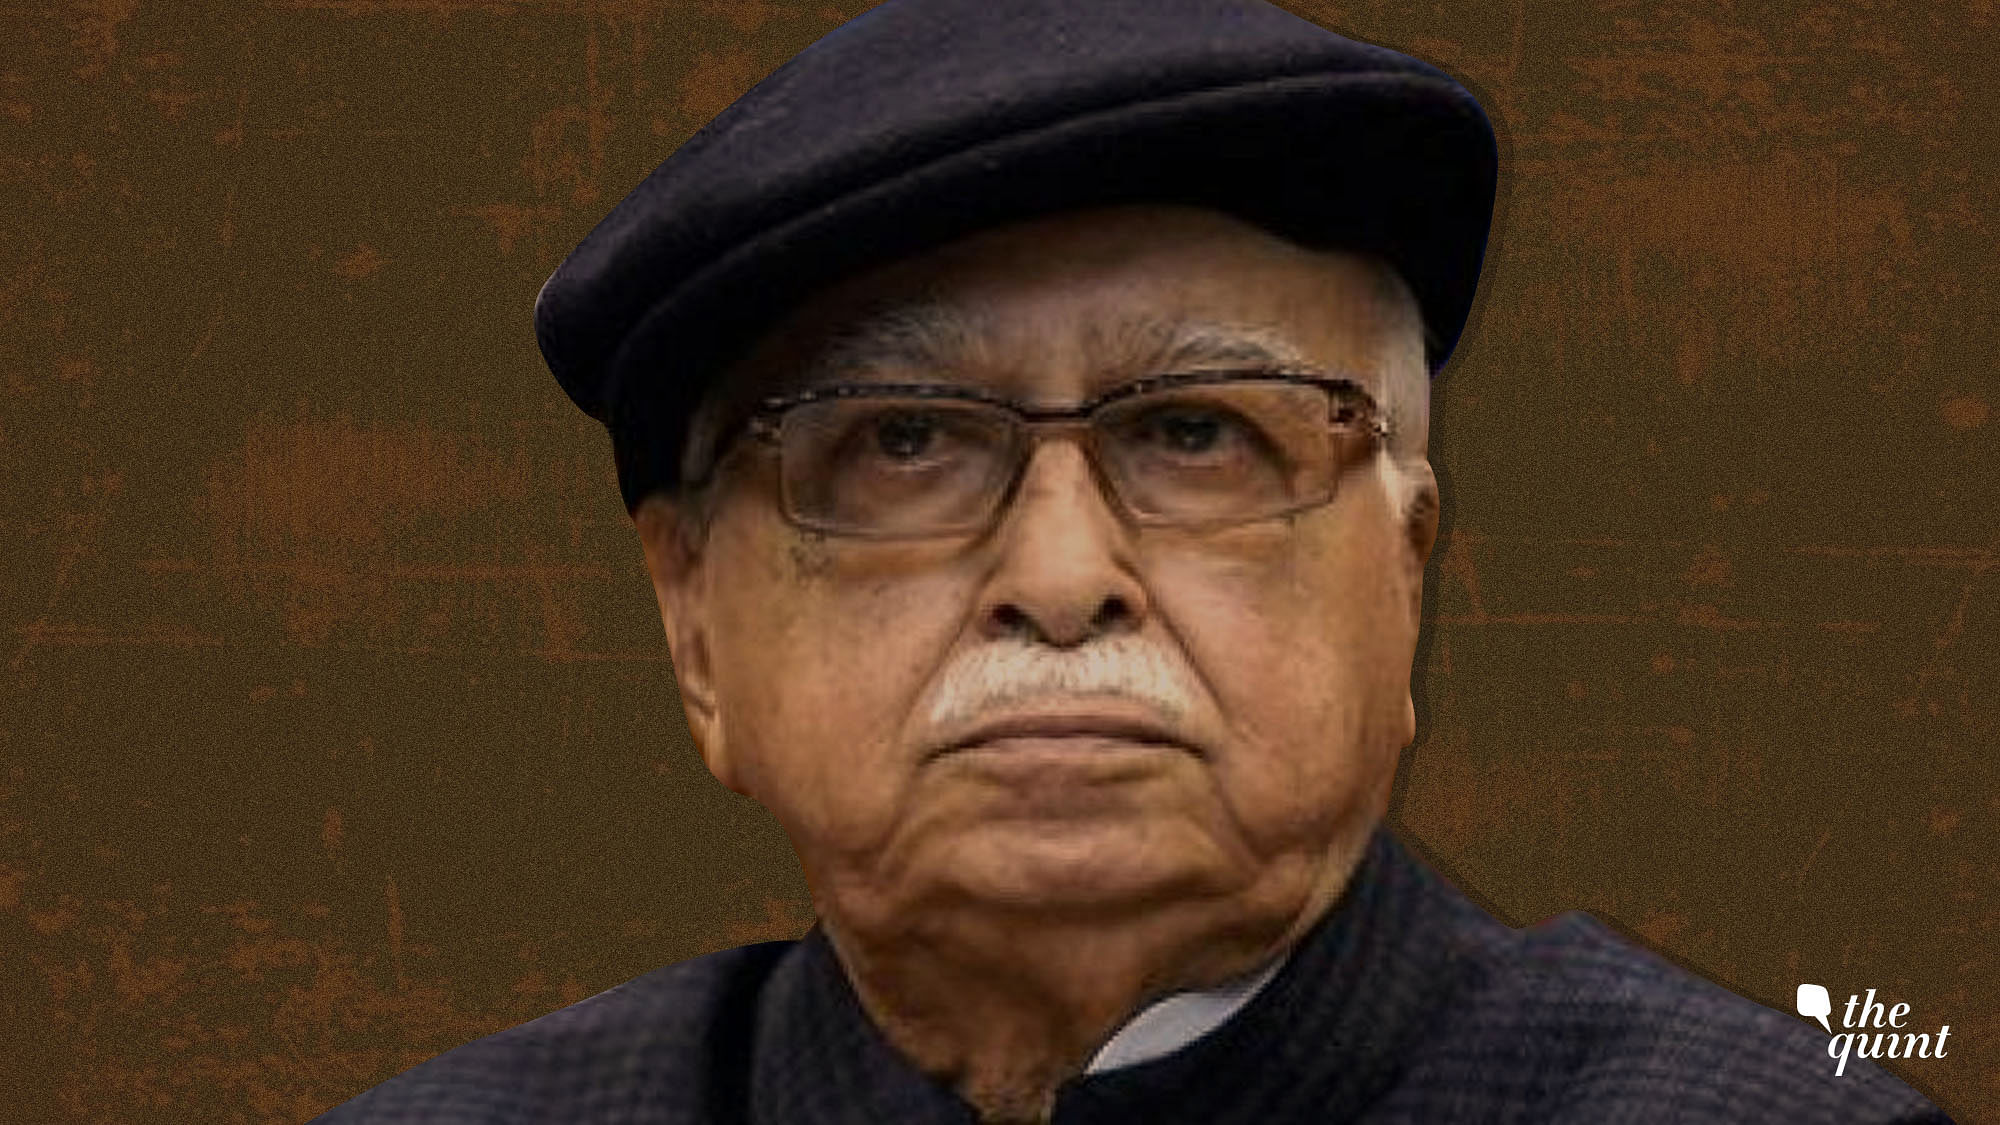 Advani’s blog will certainly provide political ammunition to the opposition.